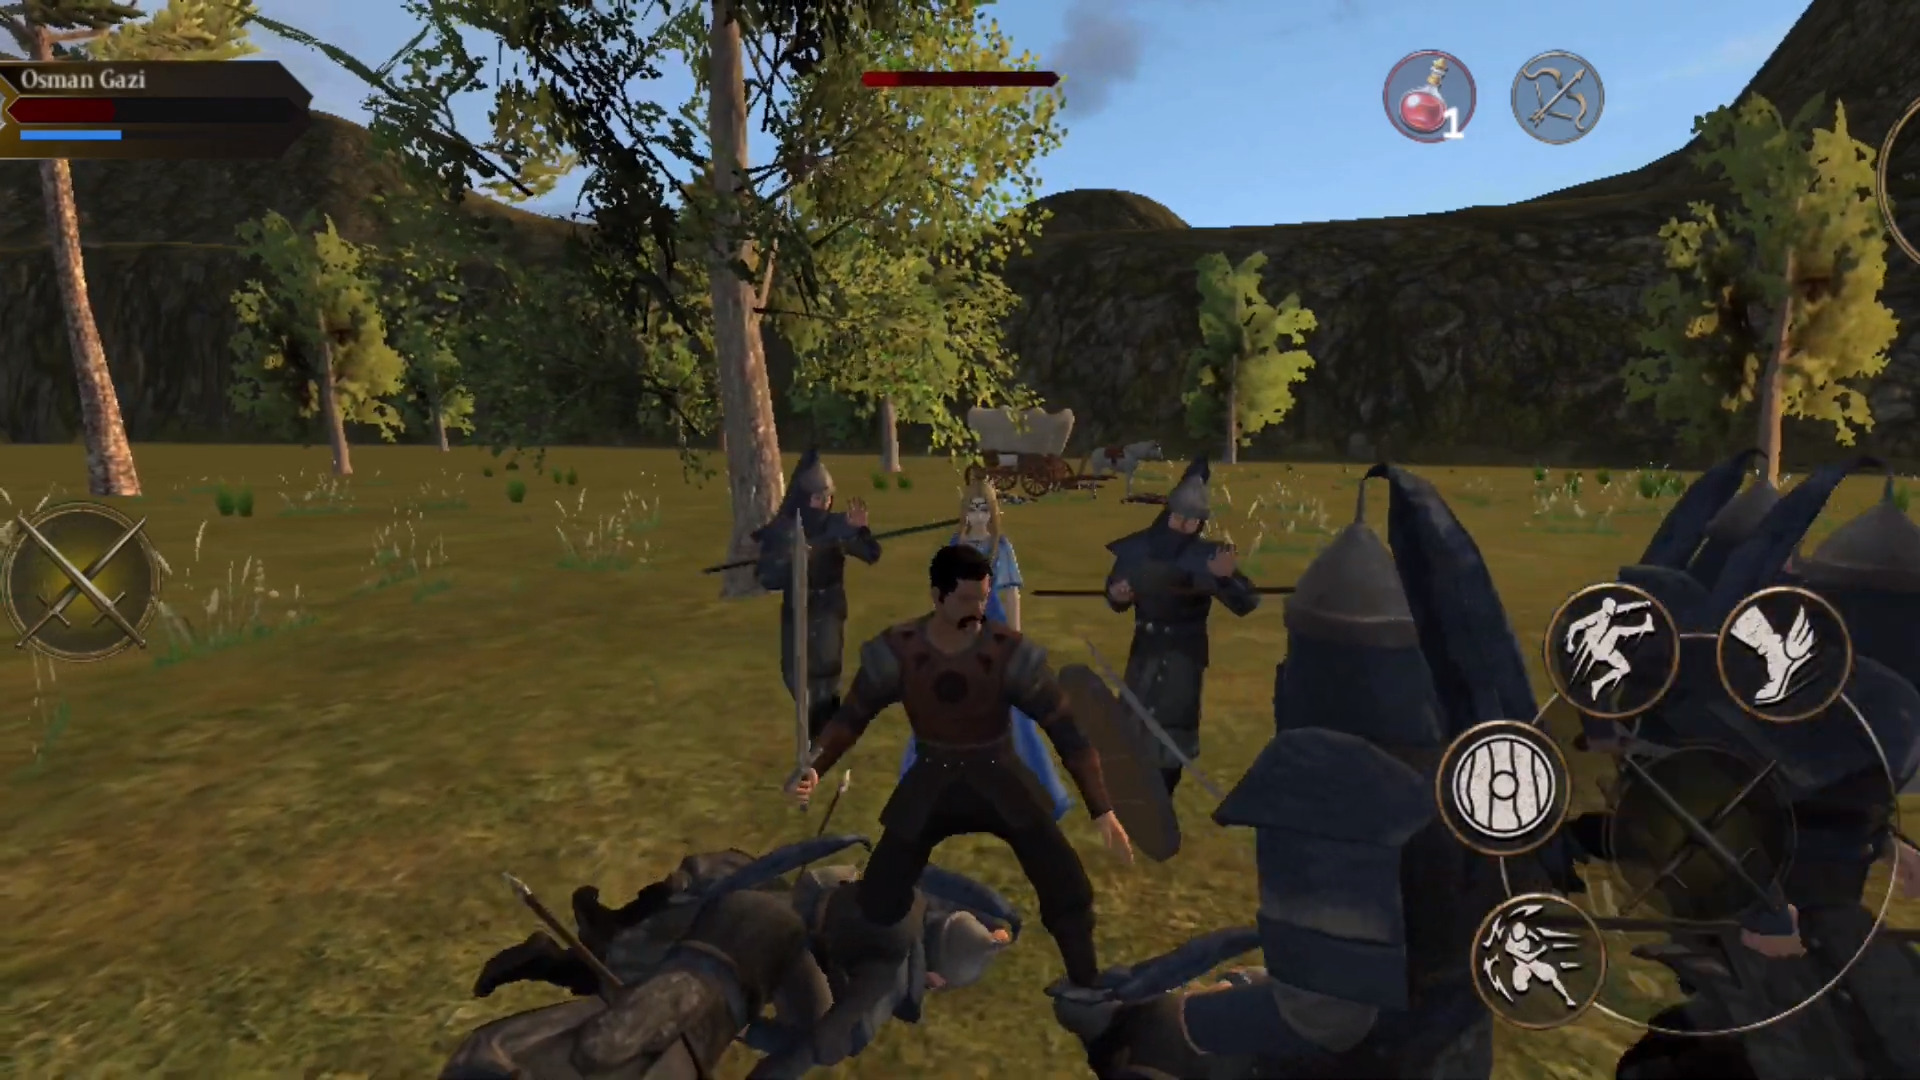 Gameplay of the Osman Gazi for Android phone or tablet.